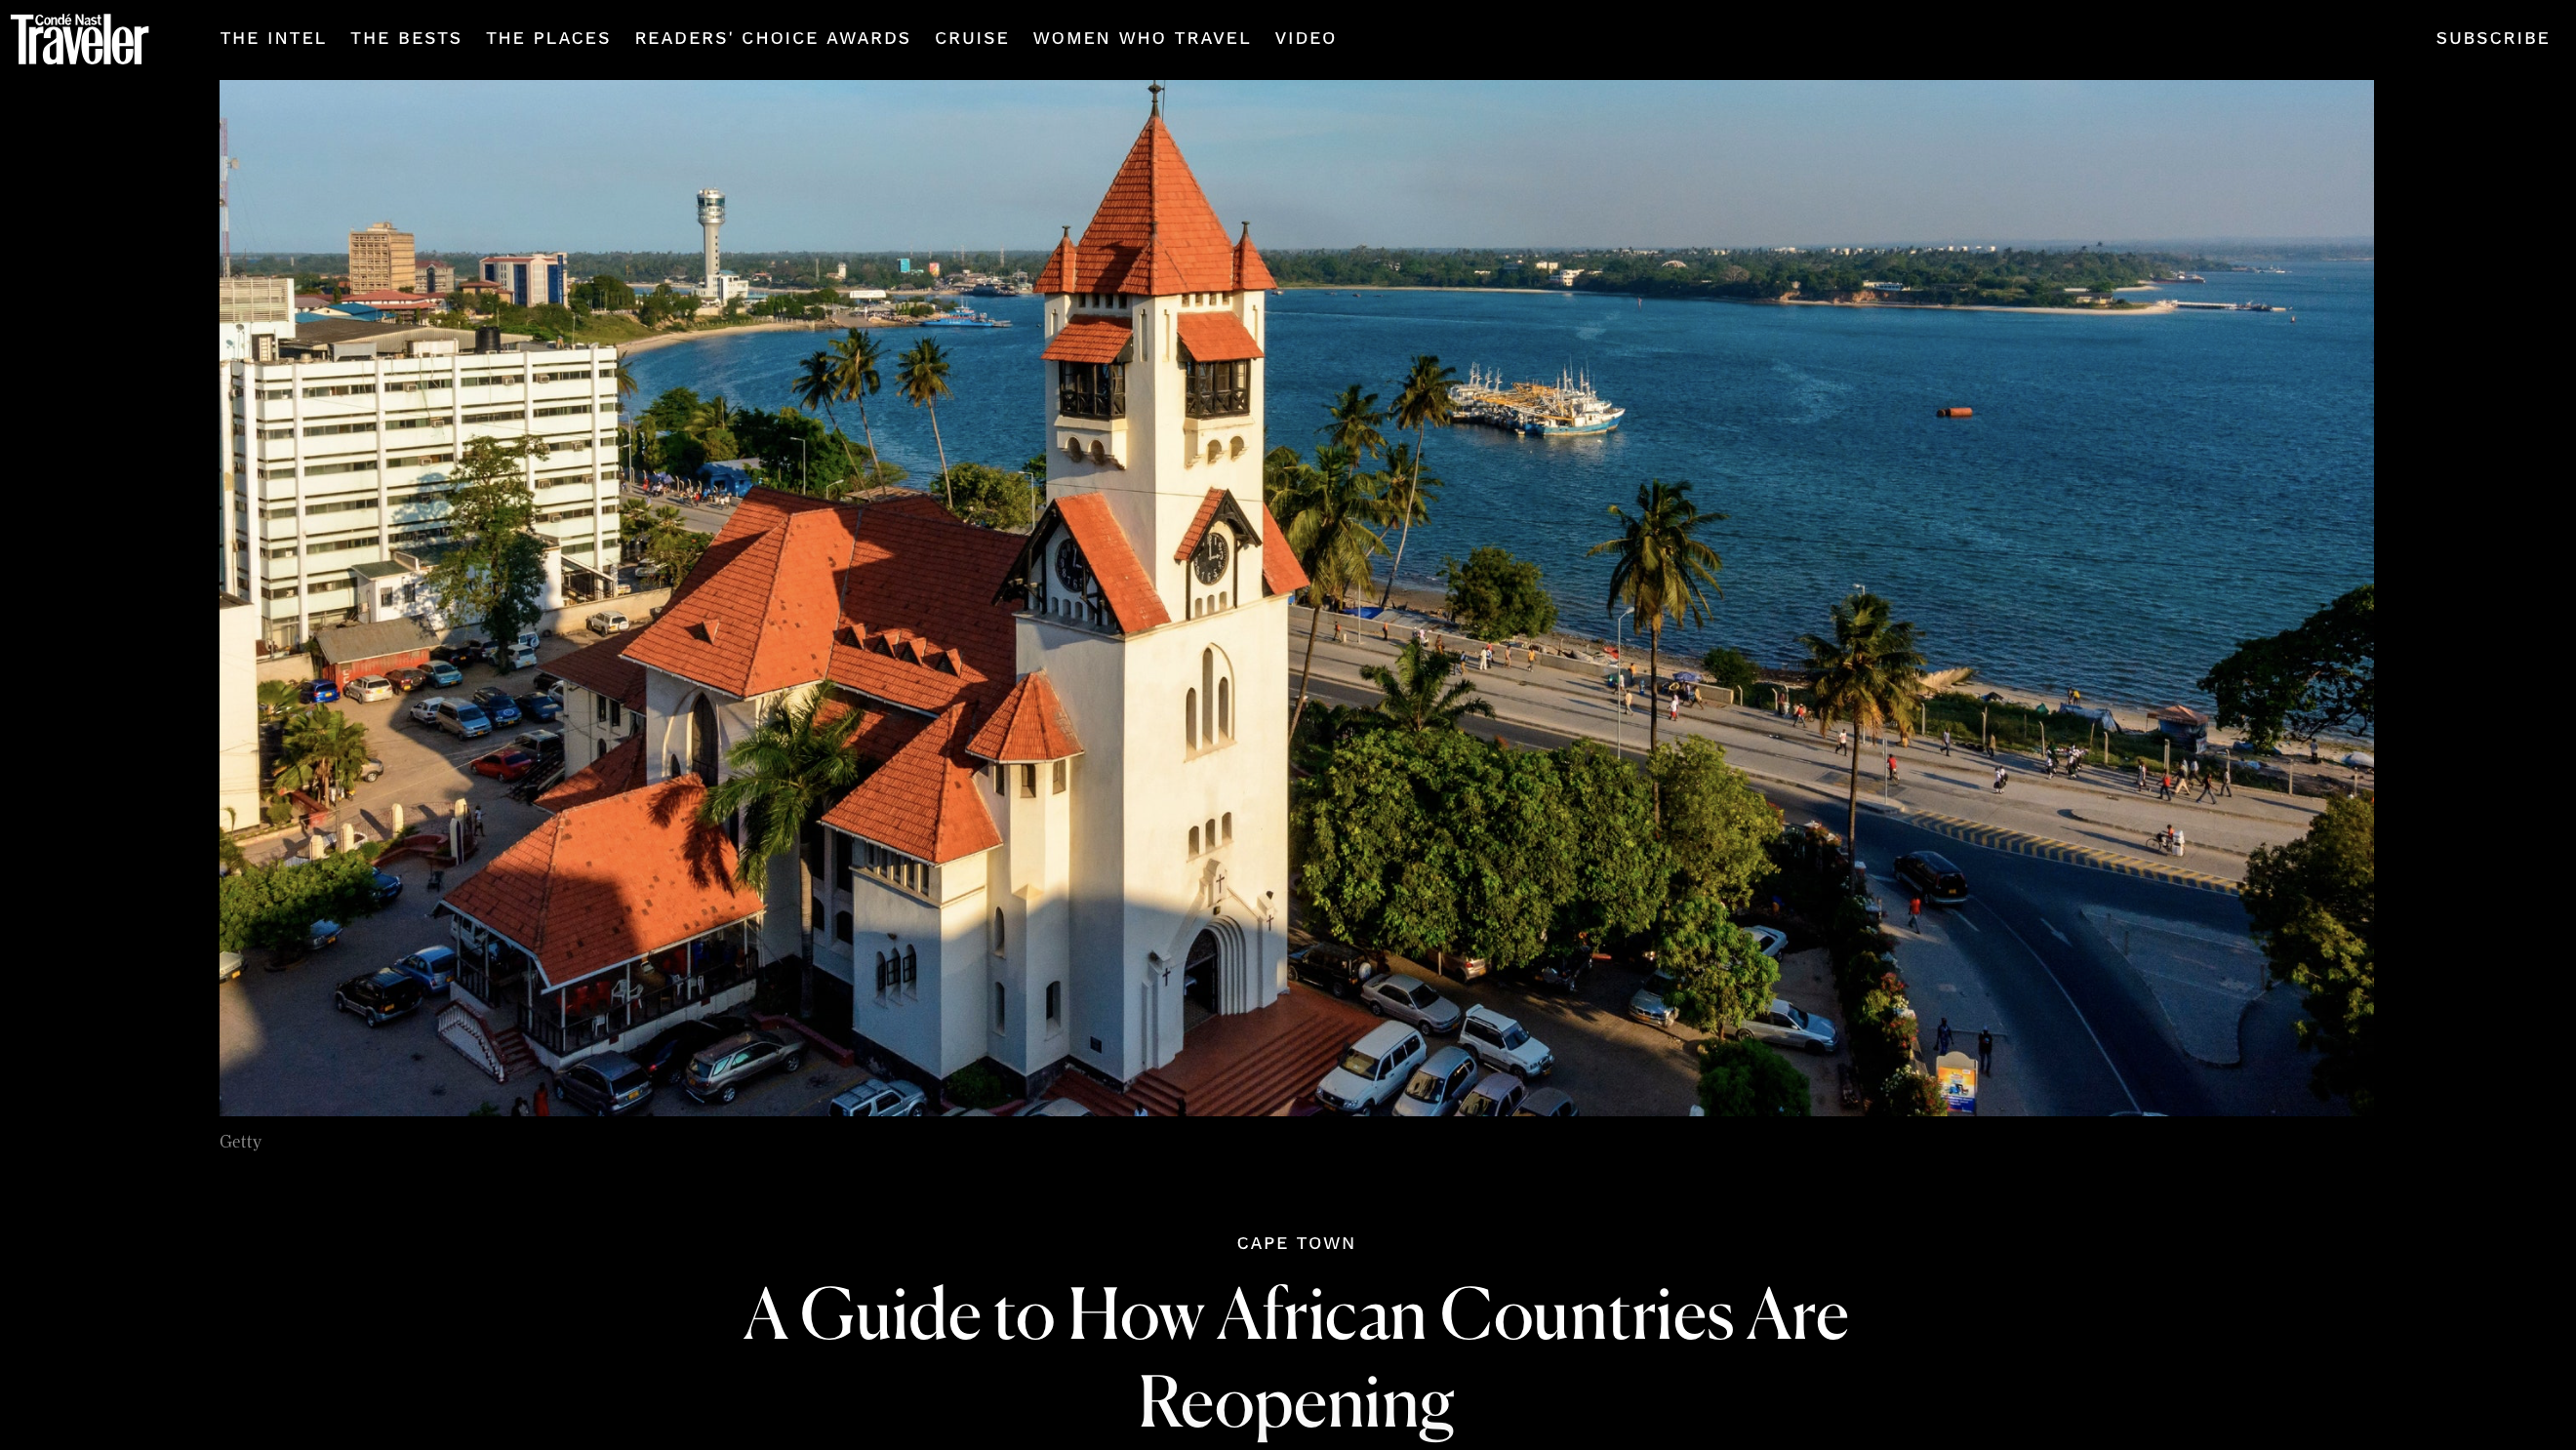 Condé Nast Traveler: A Guide to How African Countries Are Reopening